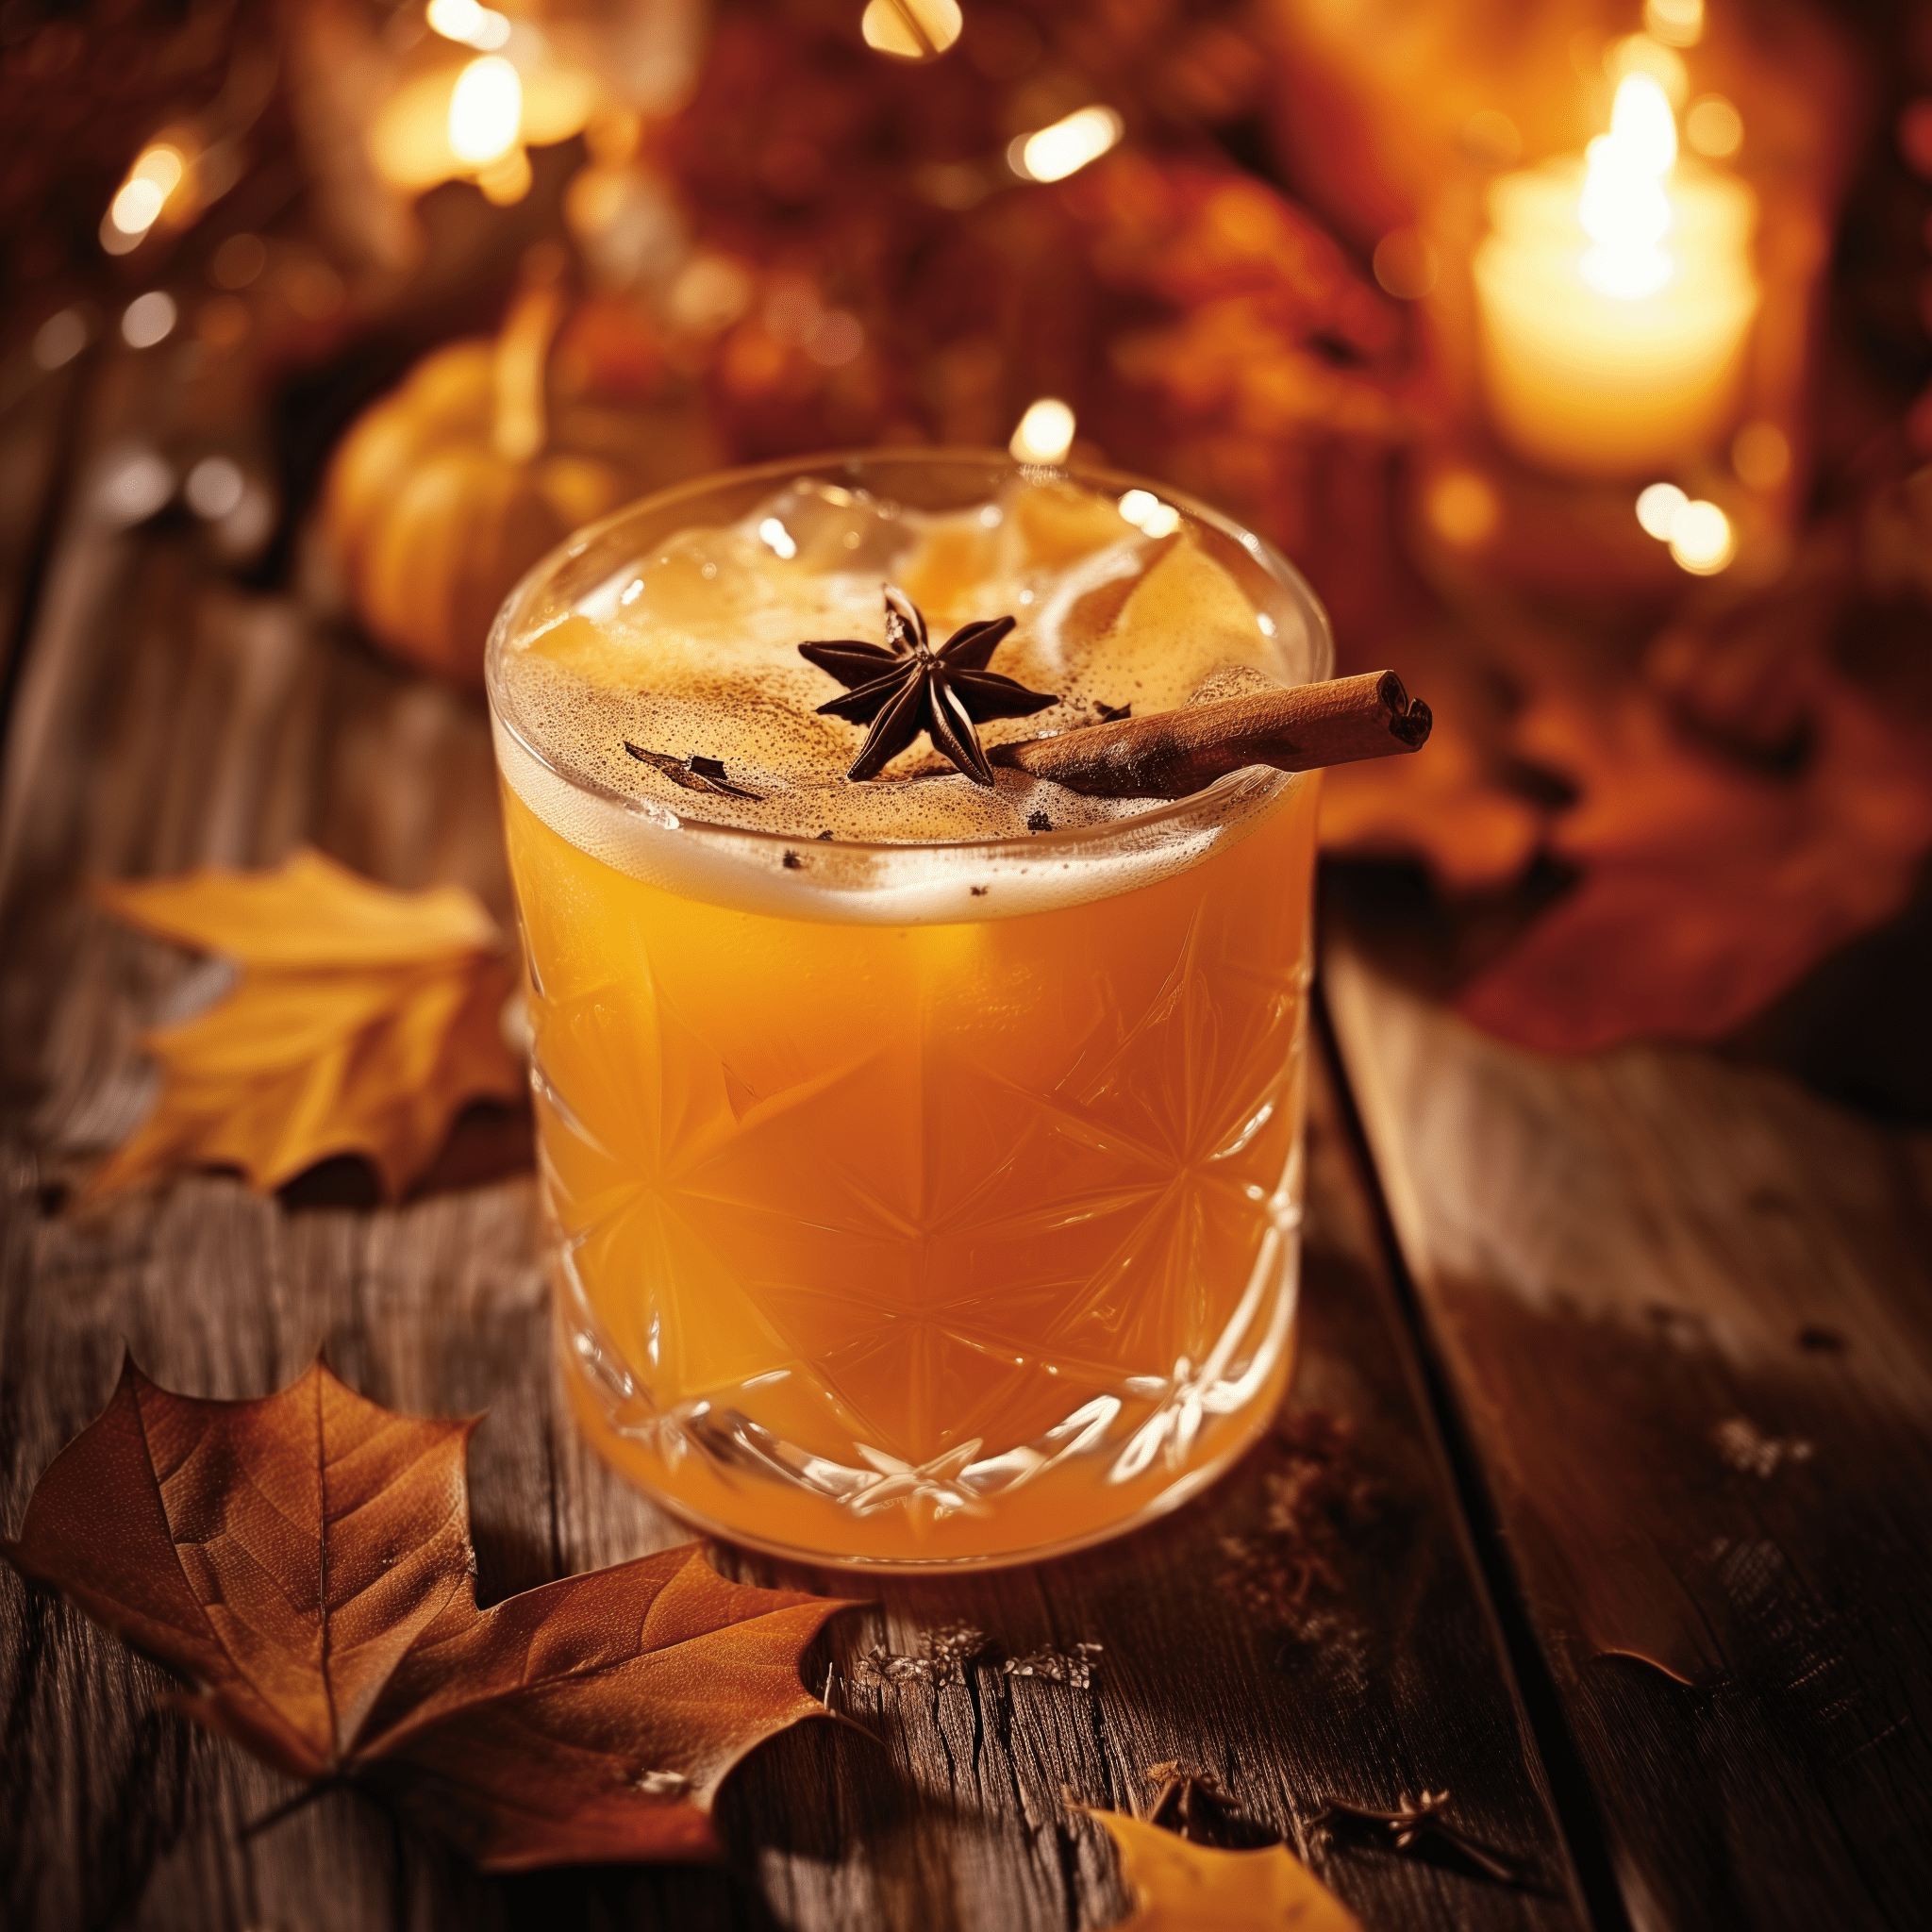 Pumpkin Rum Punch Cocktail Recipe - The Pumpkin Rum Punch is a sweet and spicy delight, with a robust pumpkin flavor that's complemented by the warmth of rum and the aromatic presence of cinnamon and nutmeg. It's rich, creamy, and has a comforting, dessert-like quality that makes it a perfect after-dinner treat.